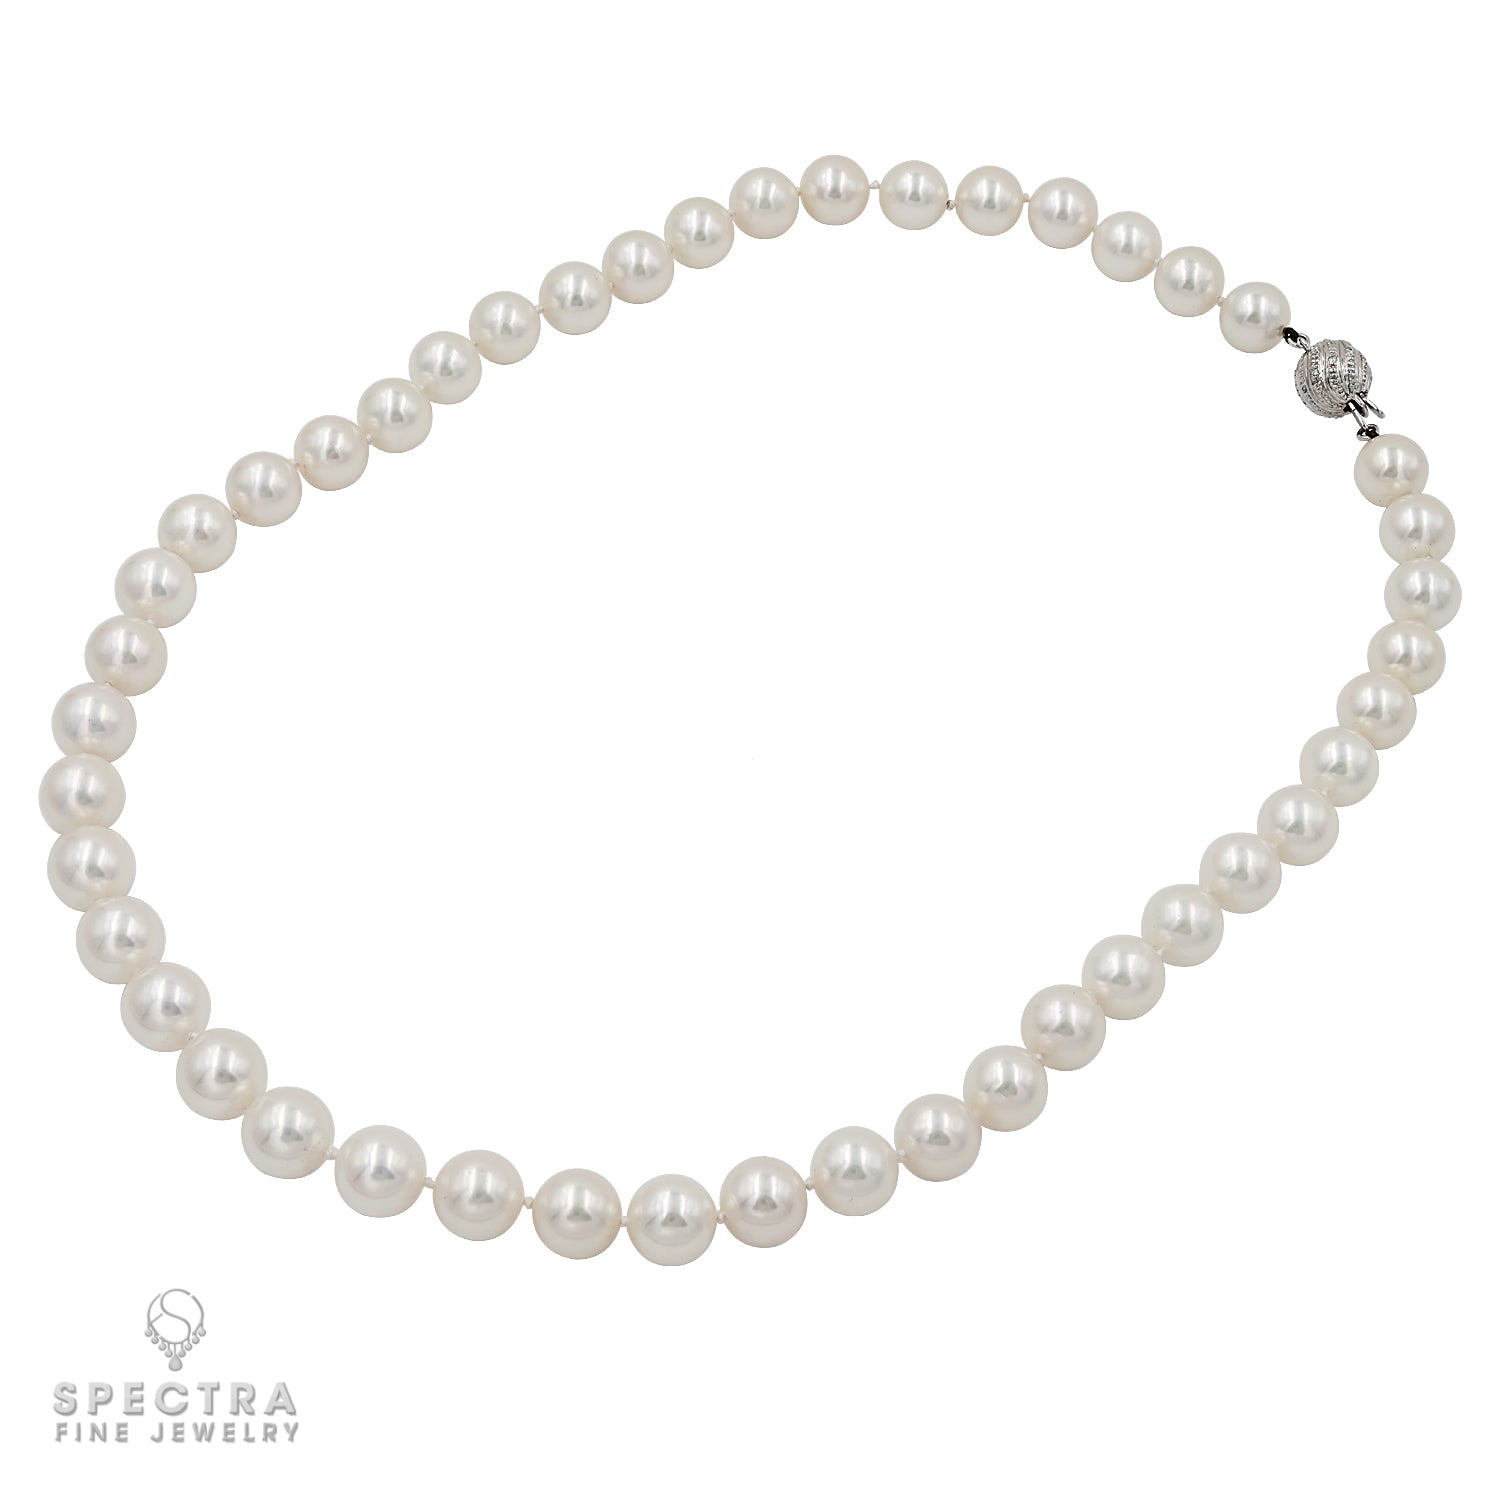 Exquisite 45 South Sea Pearl Bead Necklace with 14k White Gold Clasp and Diamonds - Shop Now!